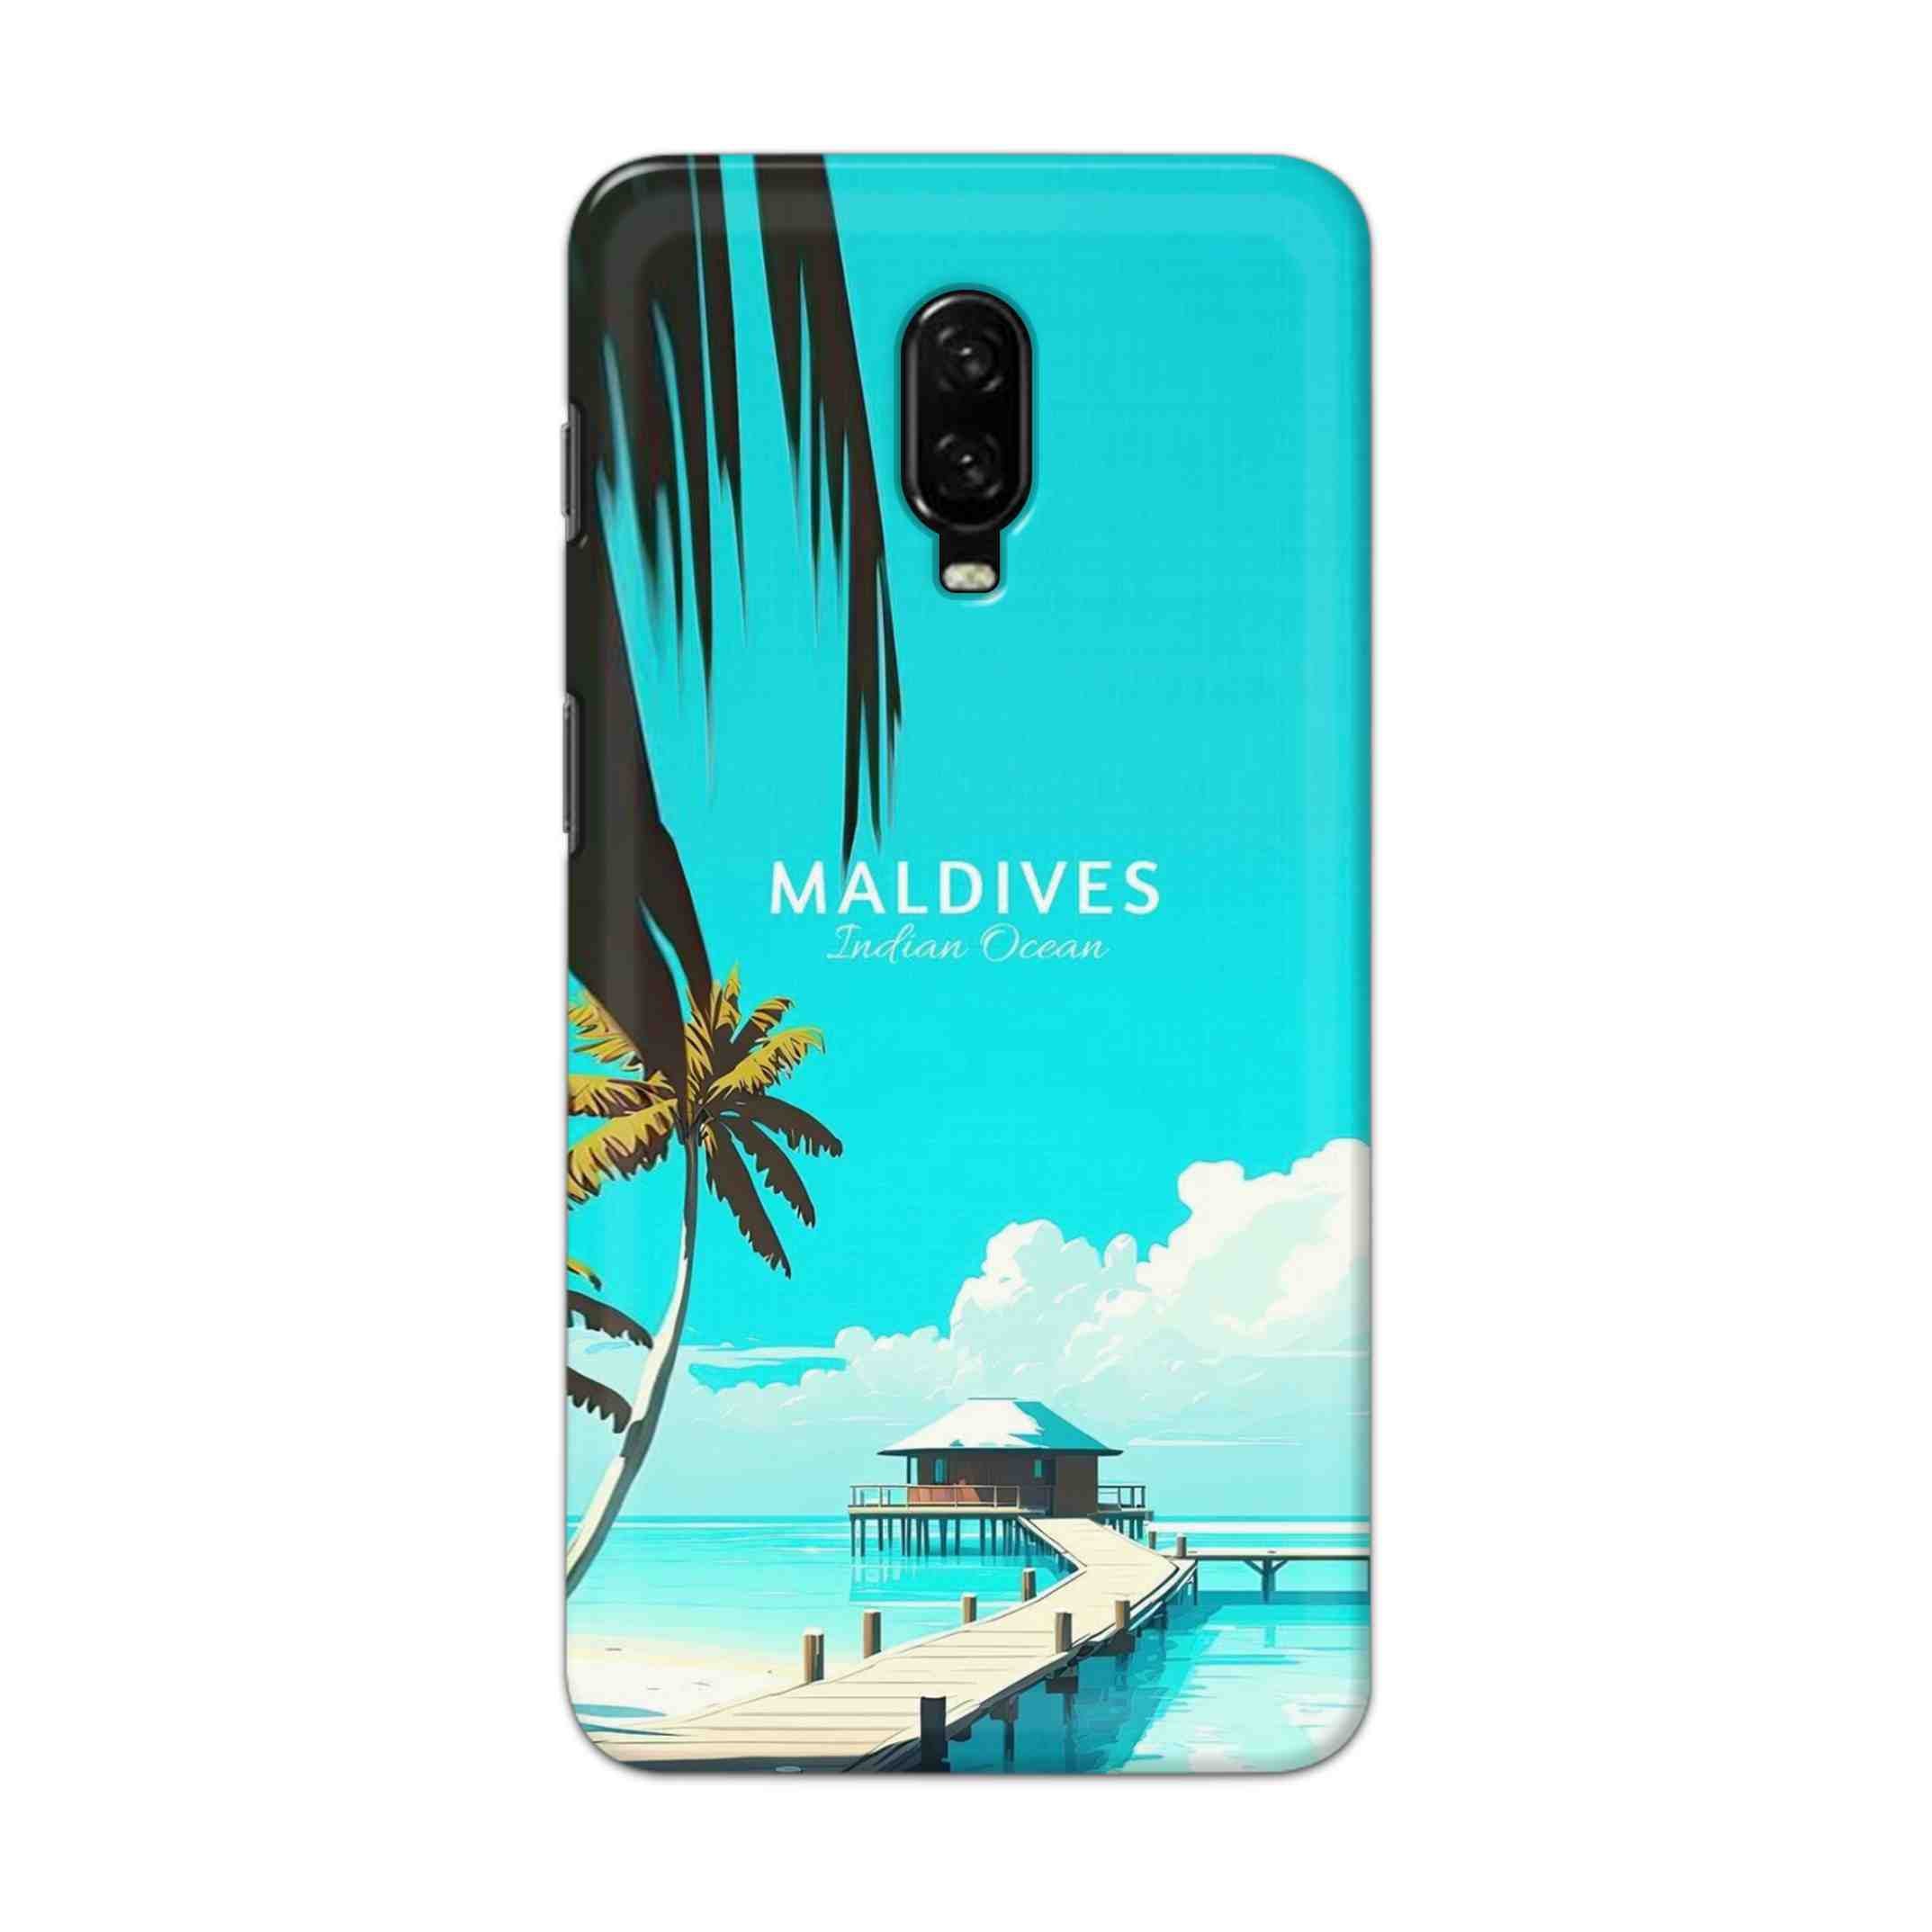 Buy Maldives Hard Back Mobile Phone Case Cover For OnePlus 6T Online